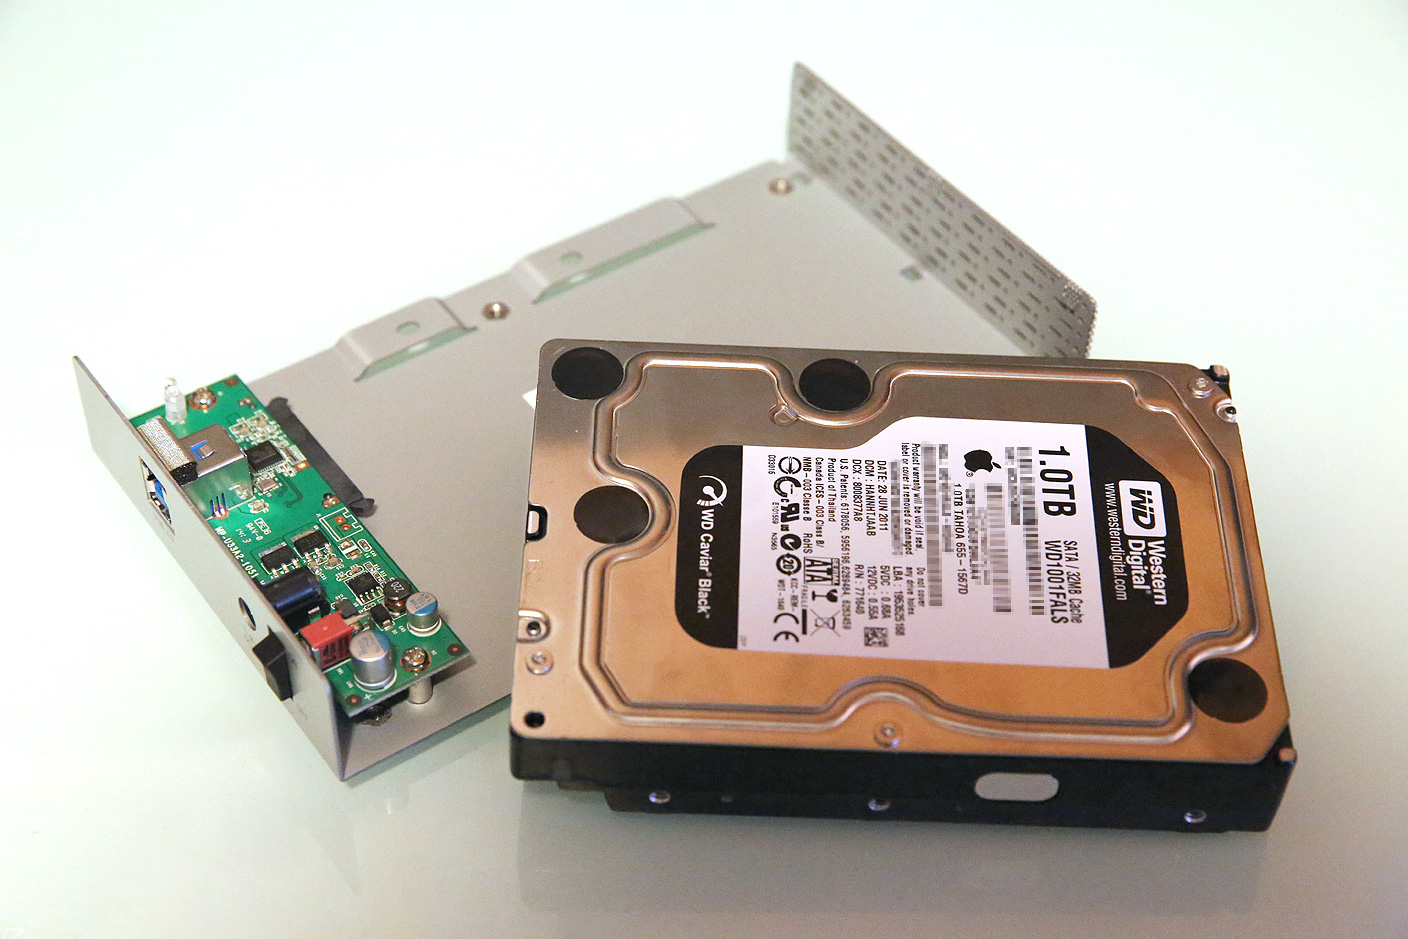 TRUE Supersonic hastighed Normal How-To: Reclaim your Mac's old hard drive or build a new one with an  external USB enclosure - 9to5Mac